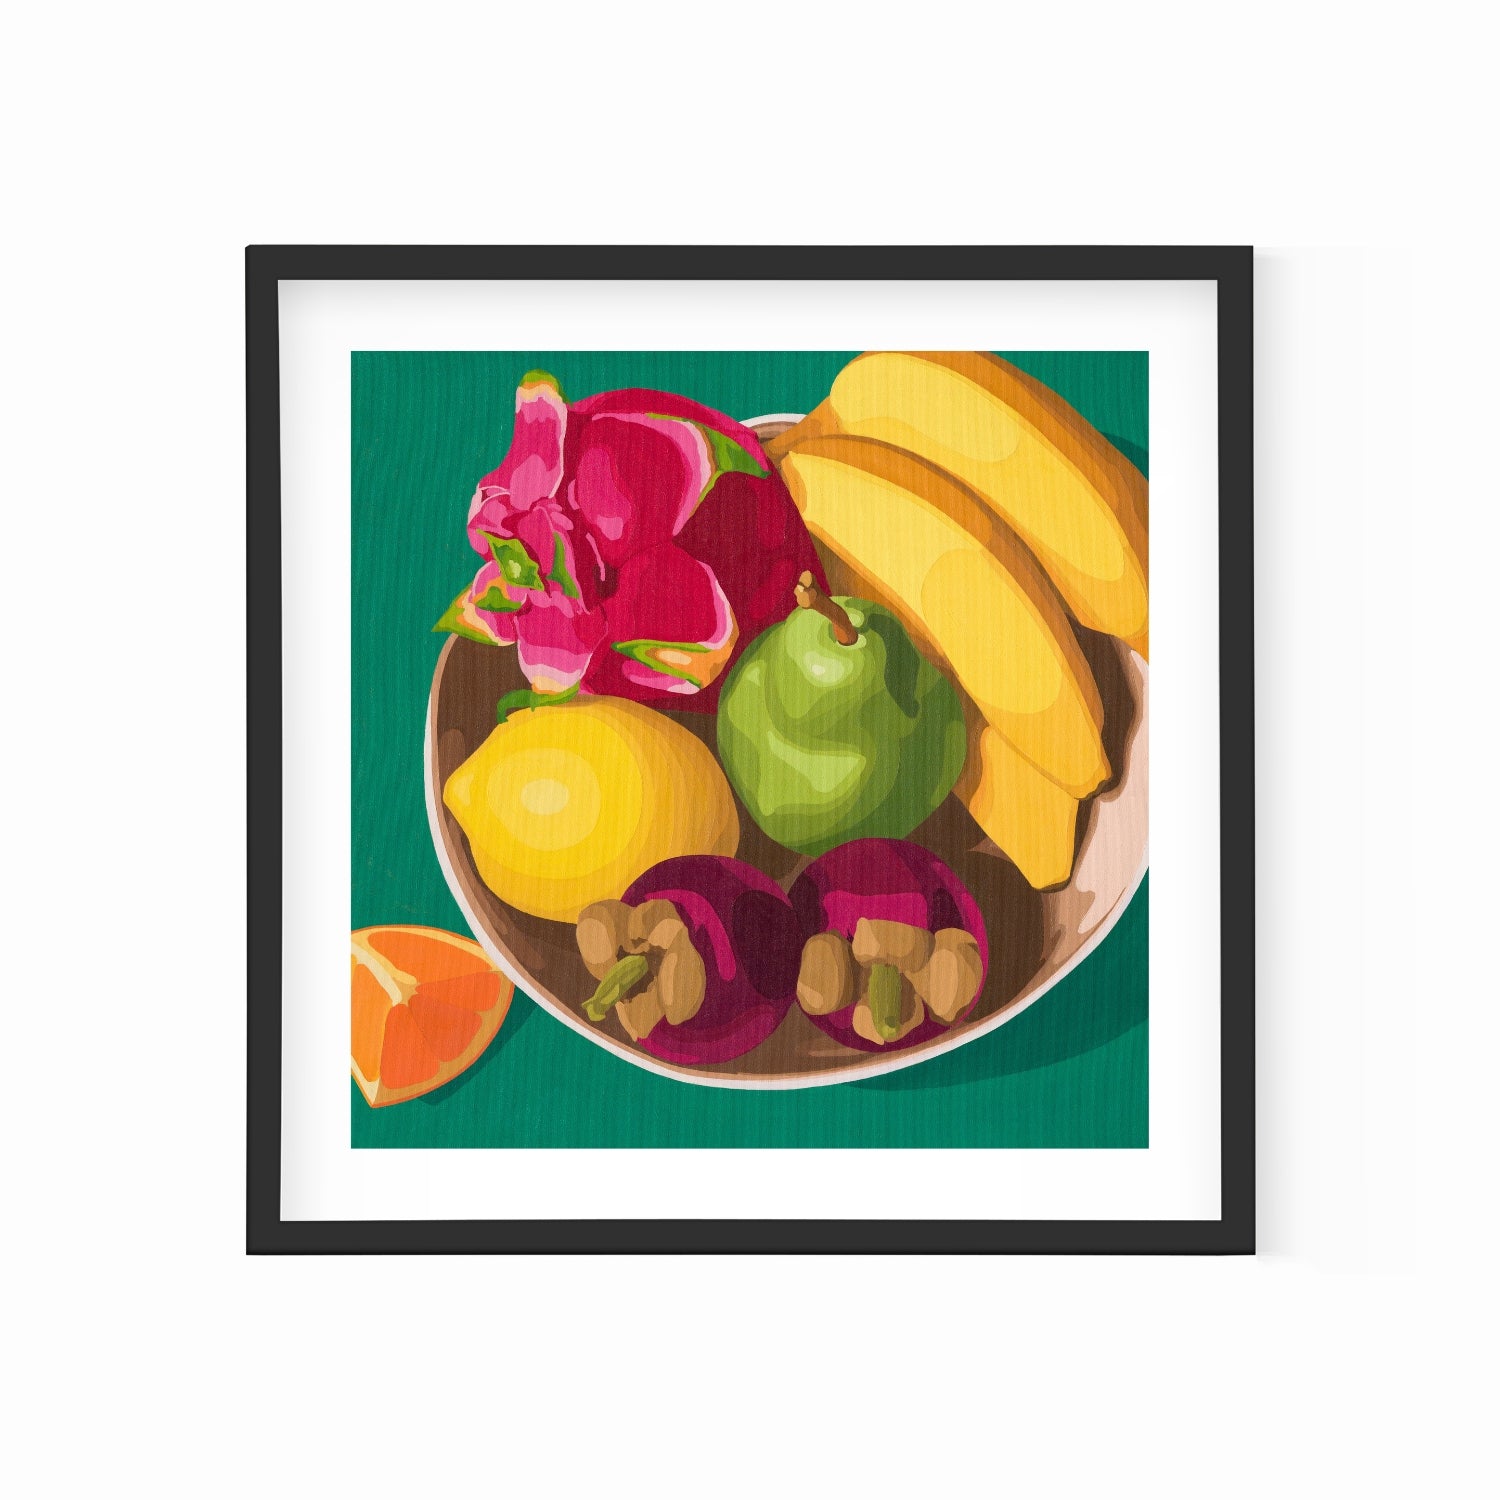 fine art print of a colorful and modern original oil painting of bright and vibrant yellow lemon green pear pink dragonfruit purple mangosteens yellow bananas orange slice on a teal background with strong shadows